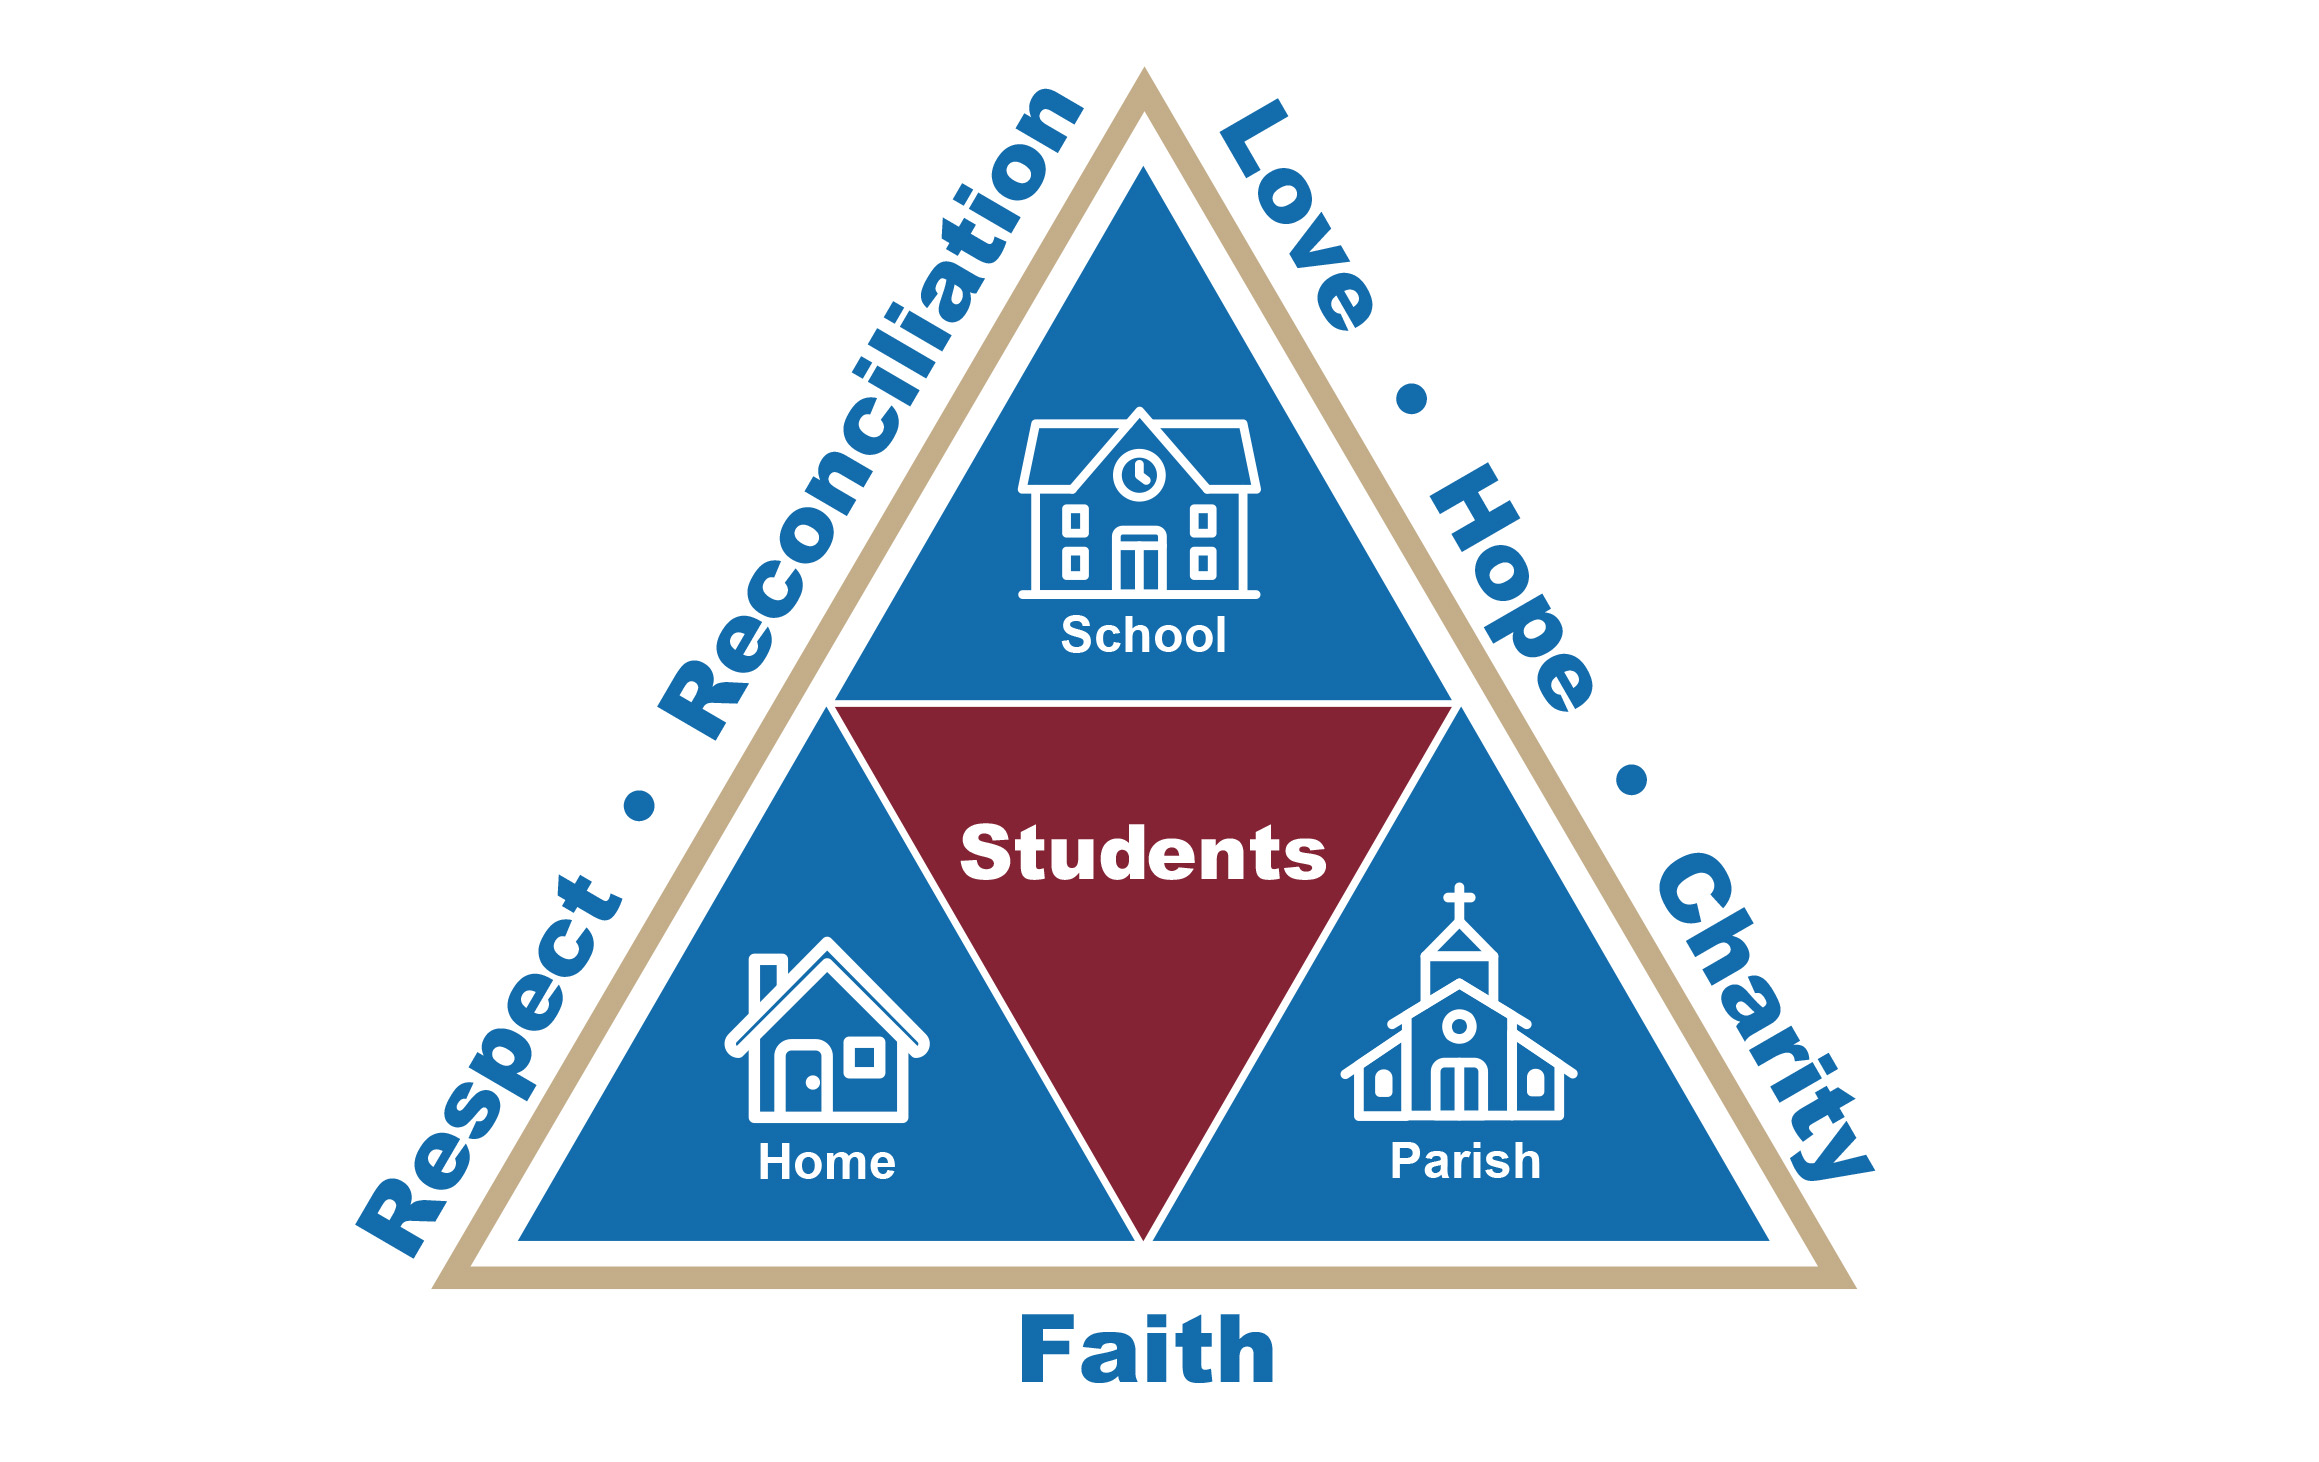 triangle with students in the centre, home, school and parish surrounding the student and values of faith, respect, reconciliation, love, hope and charity around the triangle